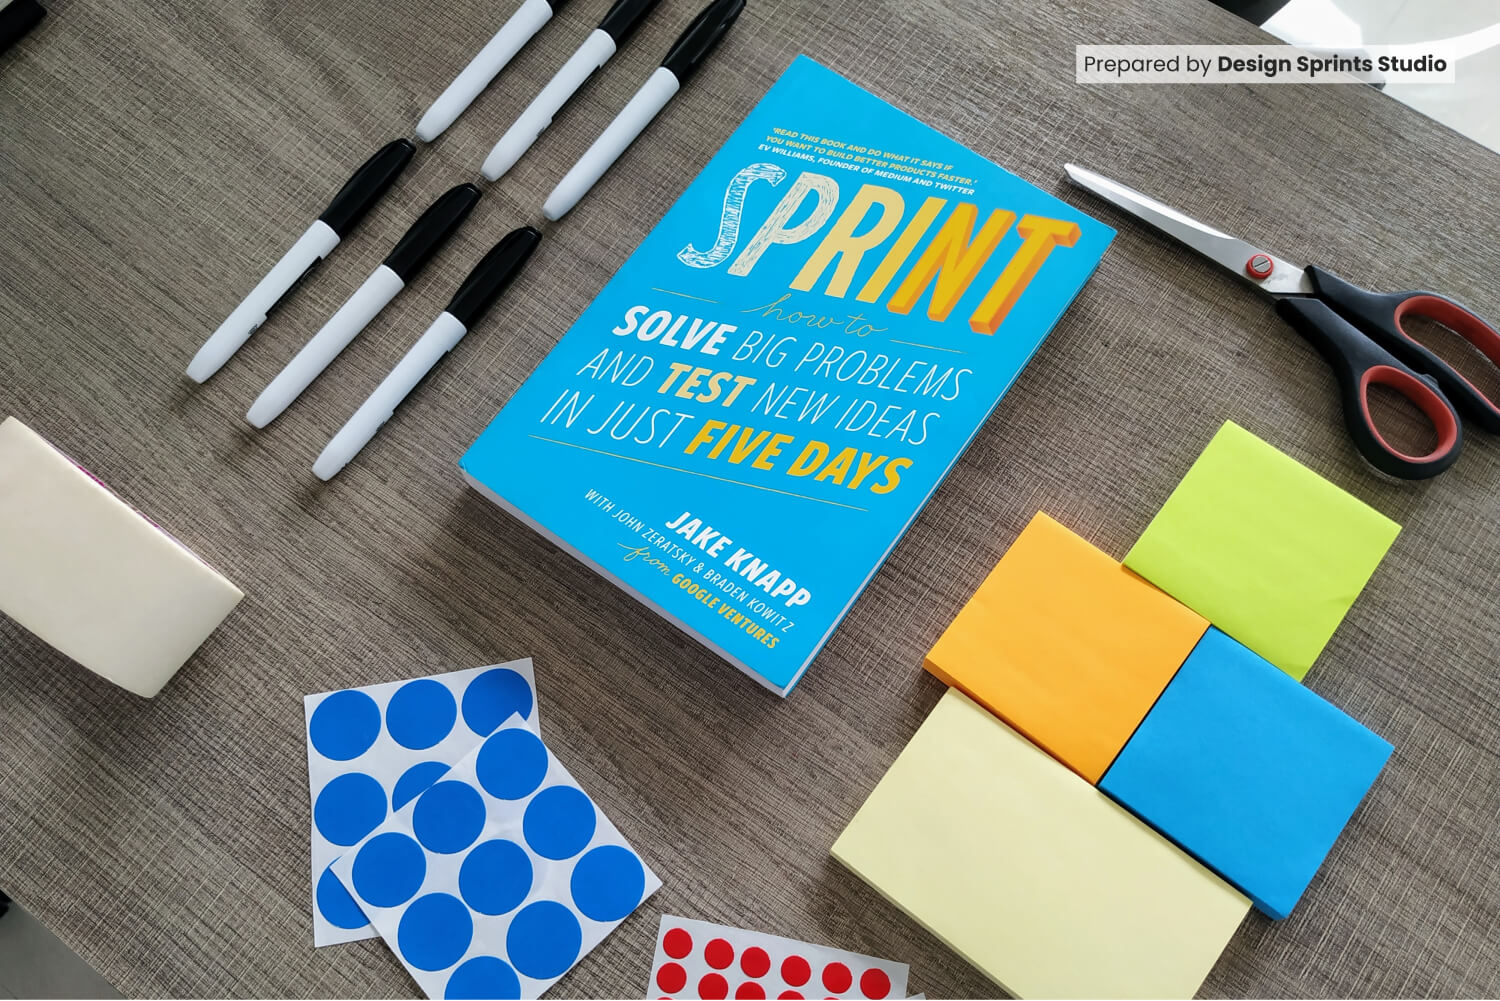 The ROI of a Design Sprint - Why It